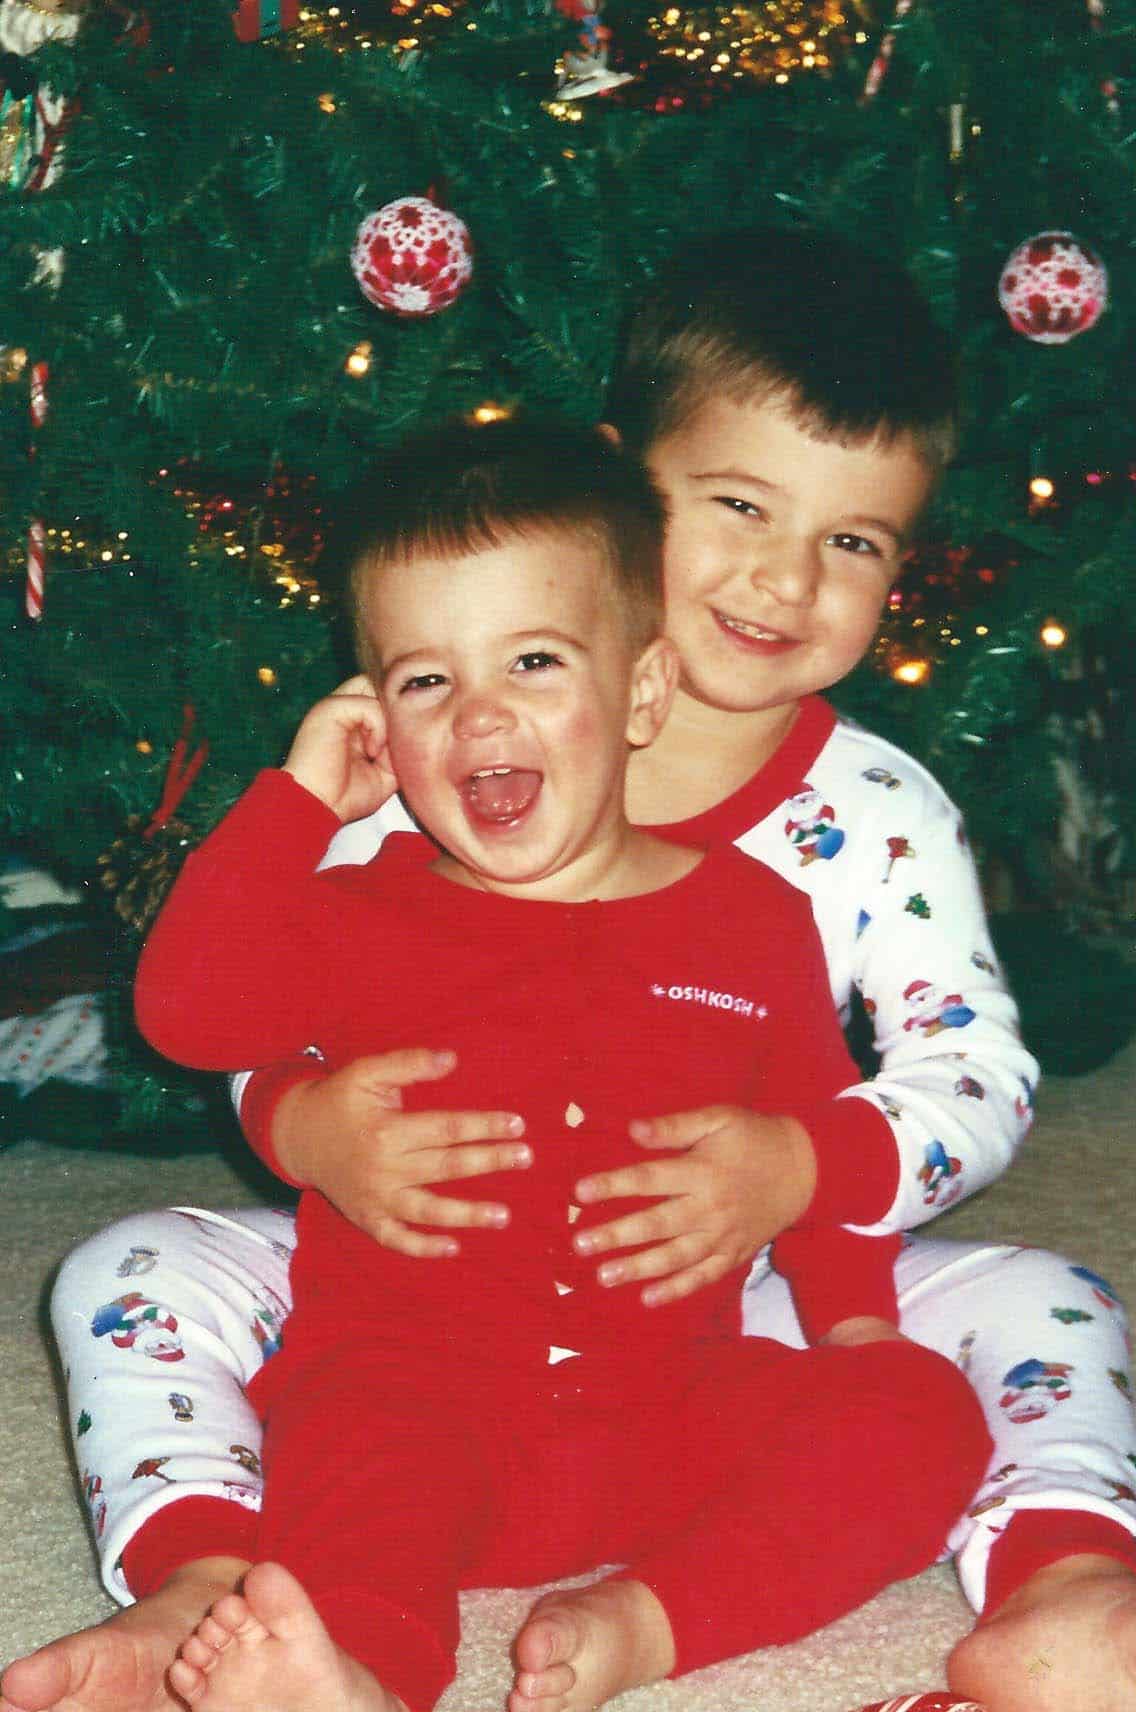 Josh and Zach in their Christmas pjs, by the tree.